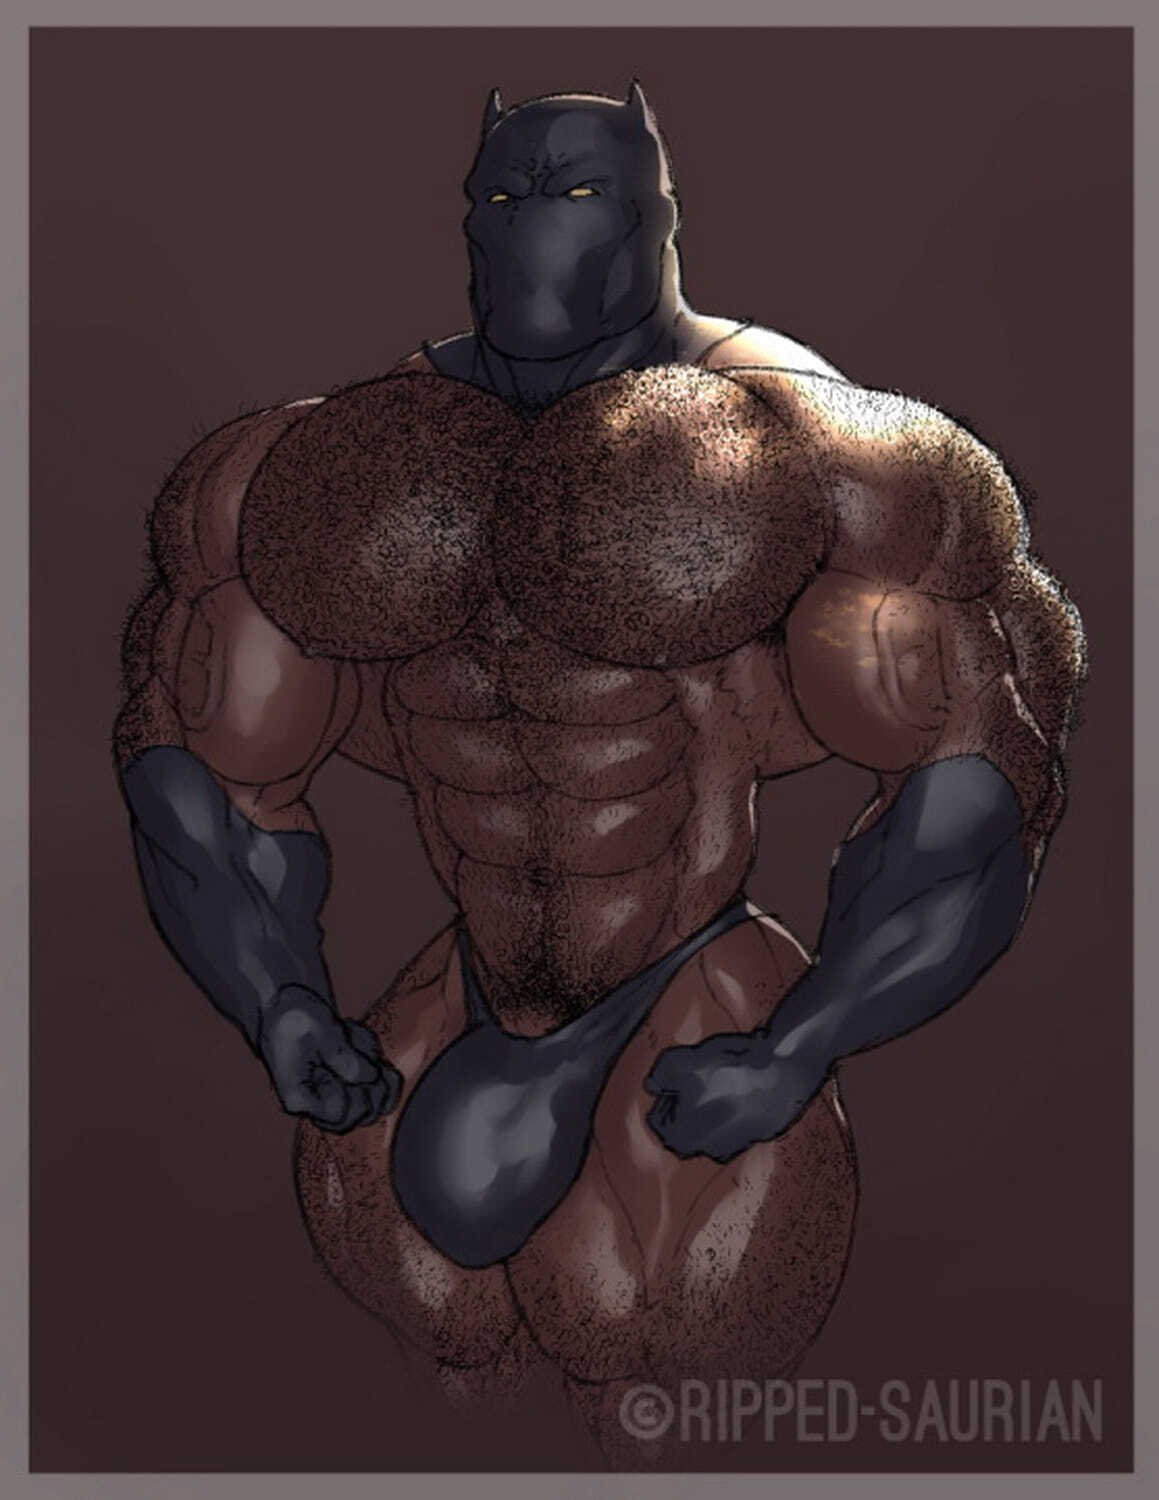 T’Challa and Black Panther (Marvel) Muscle Dark Skin Muscular